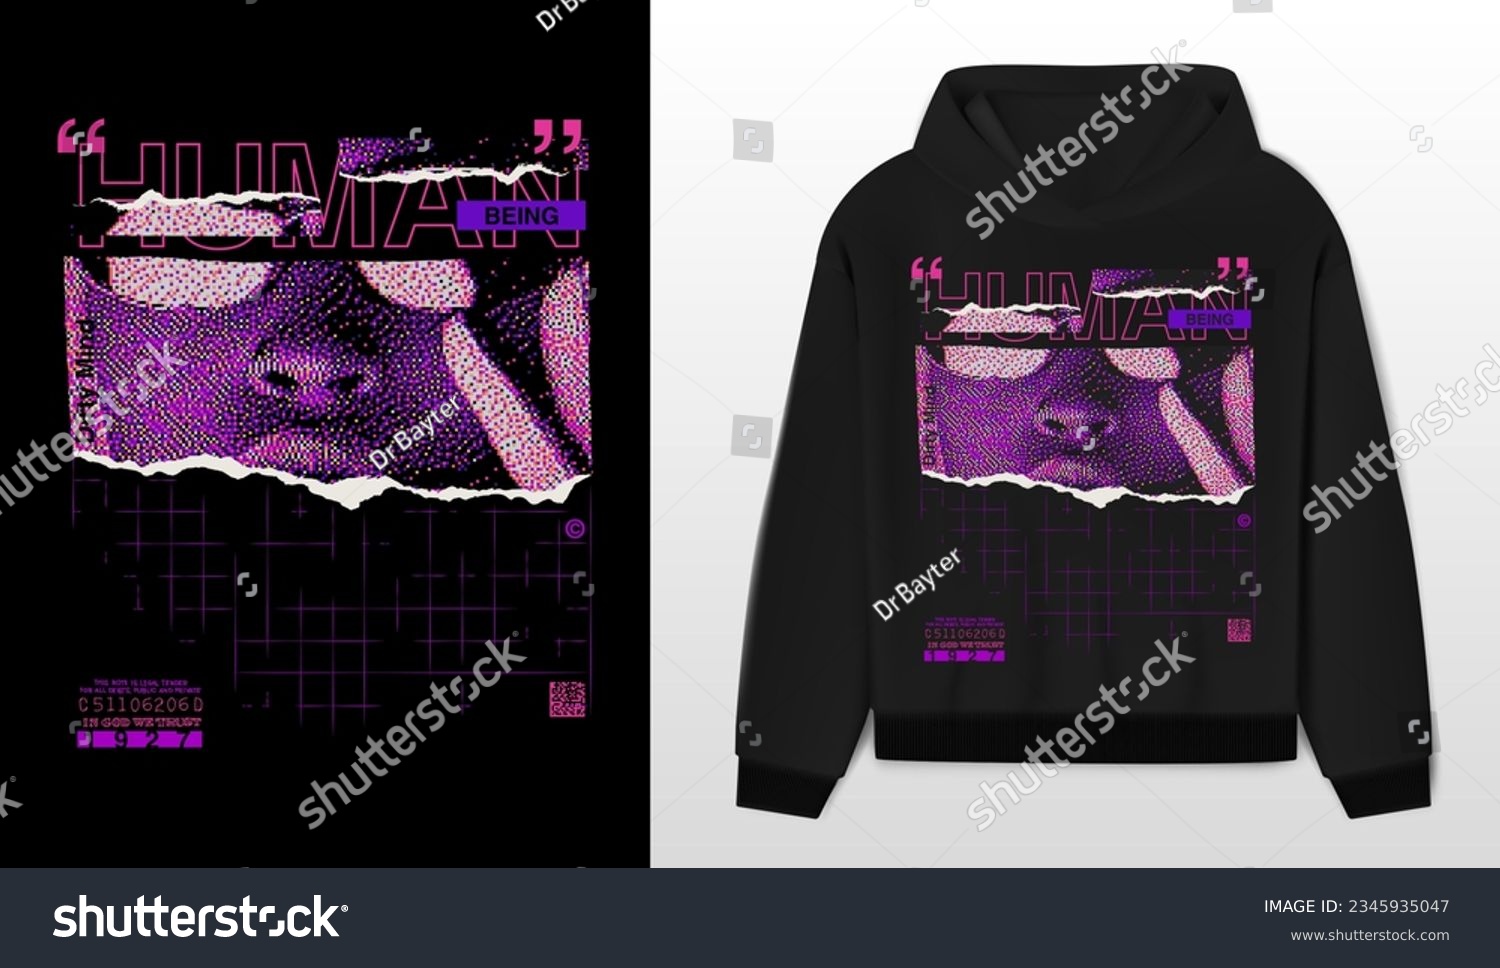 Art design of urban and retro-futuristic fusion, black hoodie and template. 'Human being' message in vibrant tones, with pixelated illustration in violet. Capture the essence of the human and futurist #2345935047